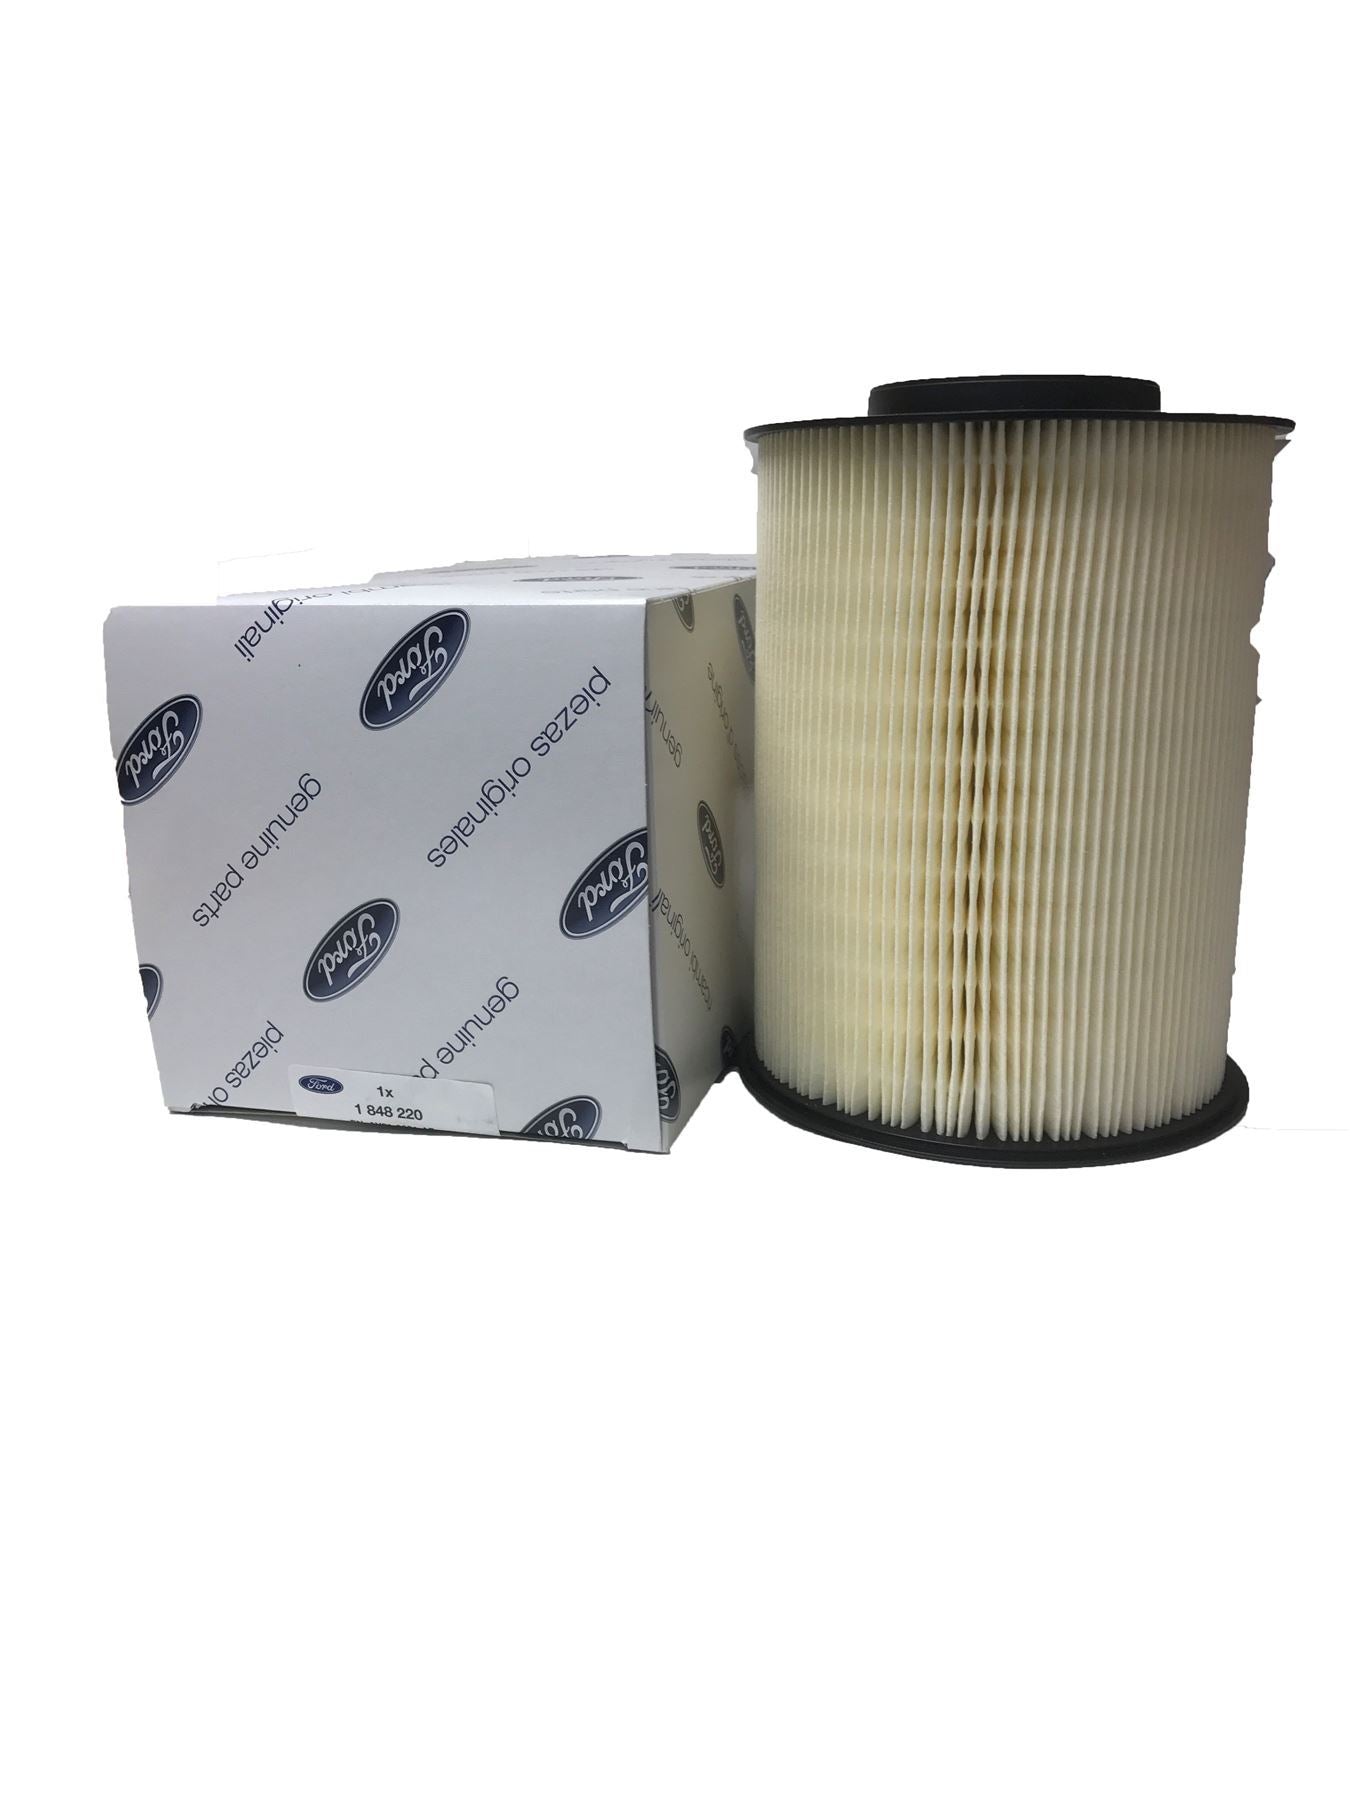 GENUINE FORD FOCUS III 1.6 Ti 07.10 - 125HP ROUND TYPE AIR FILTER 1848220